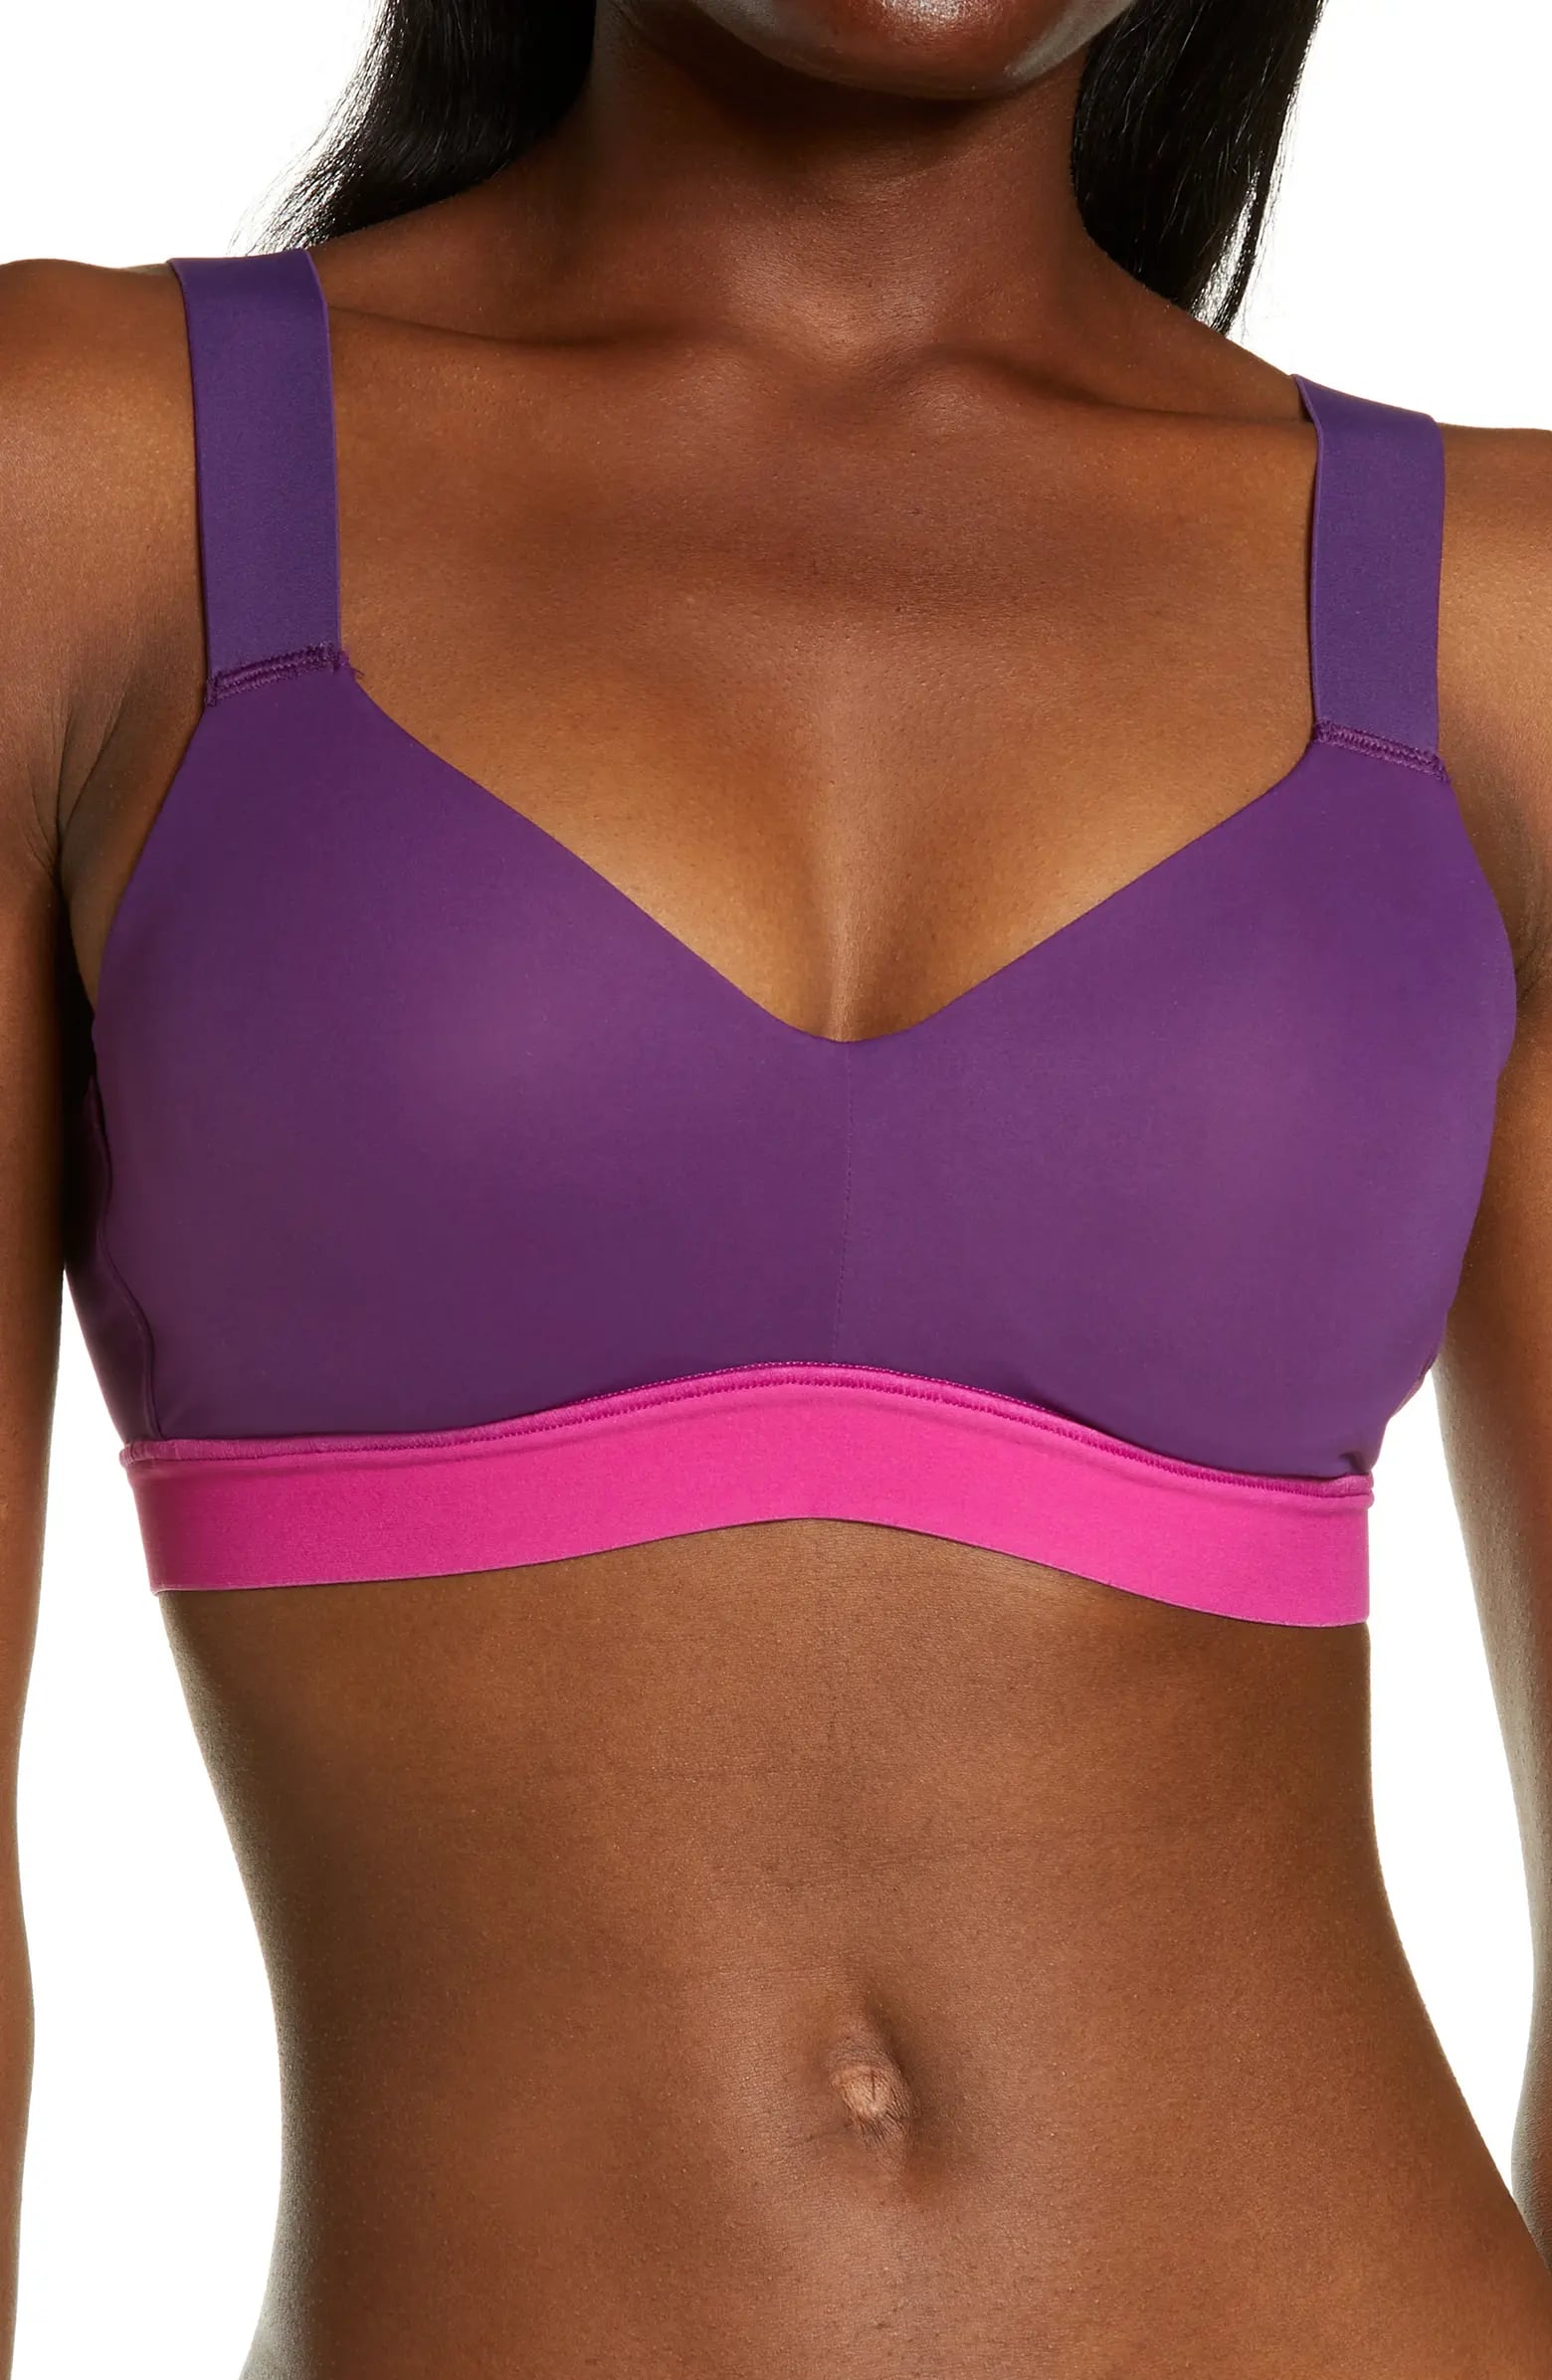 A Supportive Sports Bra: Natori Dynamic Contour Underwire Sports Bra, Don't Miss Out on These 75 Fitness Deals, All on Sale For Cyber Monday!